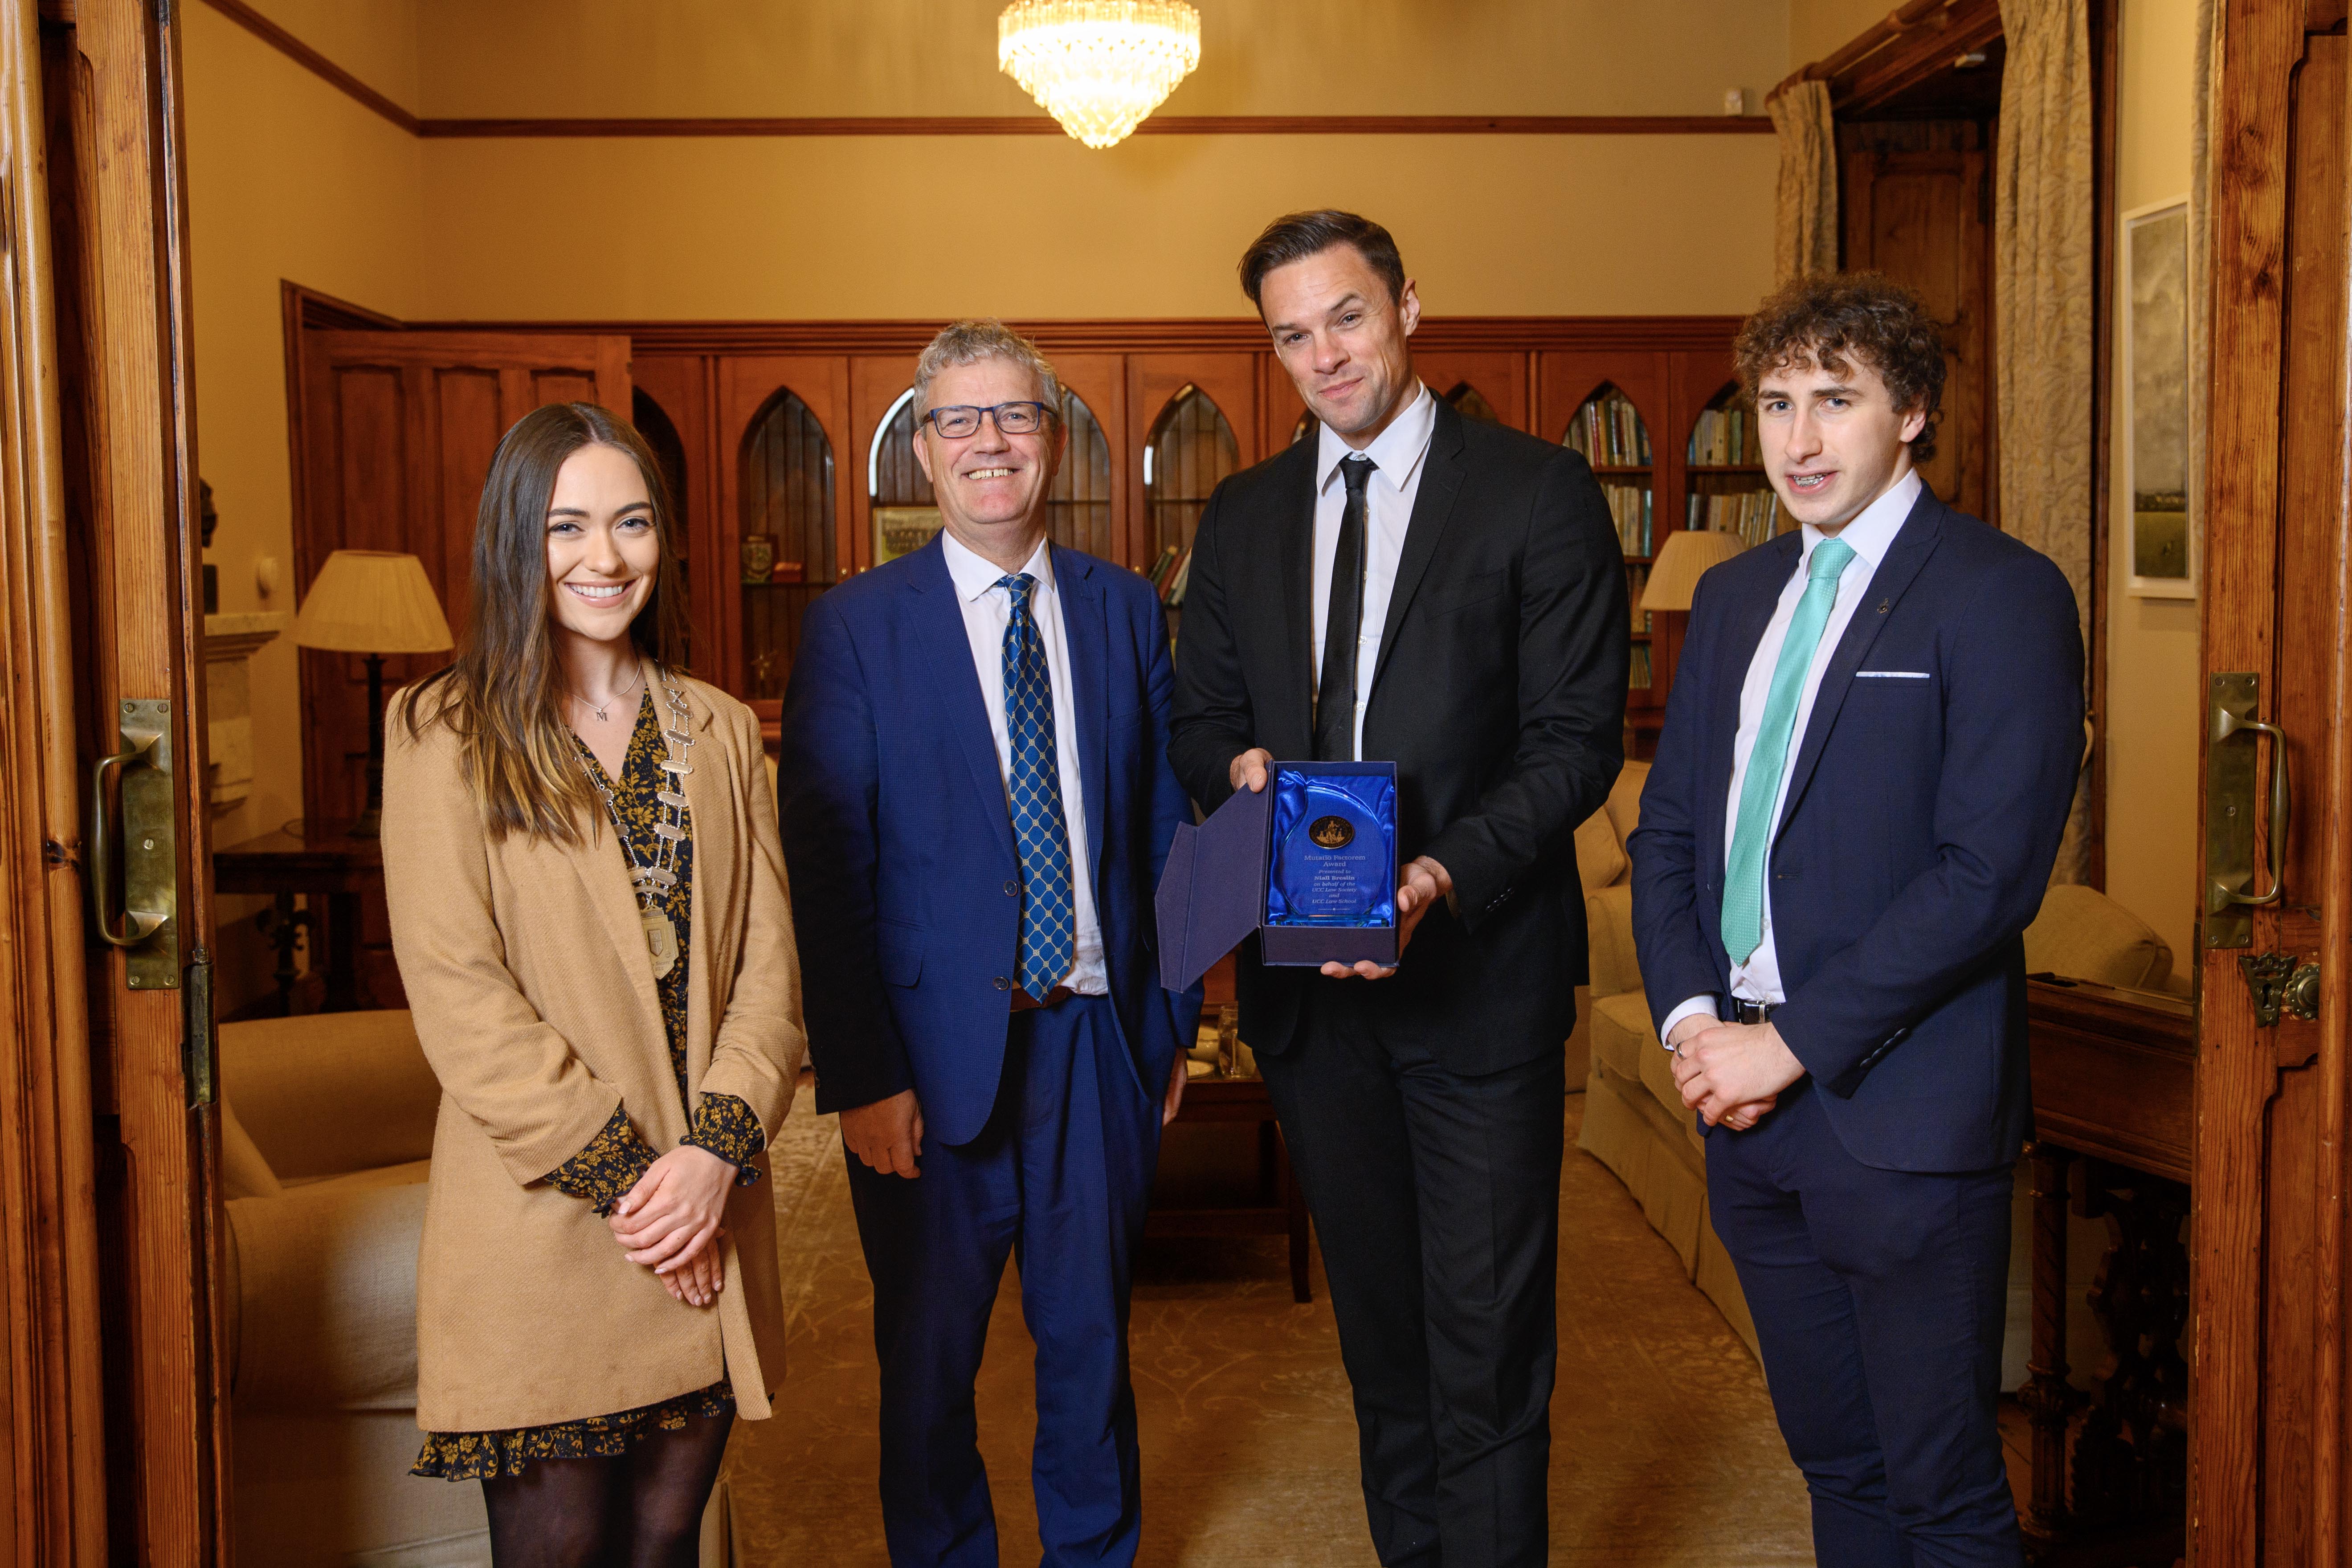 Mental Health Advocate and Musician Niall Breslin, 'Bressie', presented with the Mutatio Factorem award by UCC Law Society